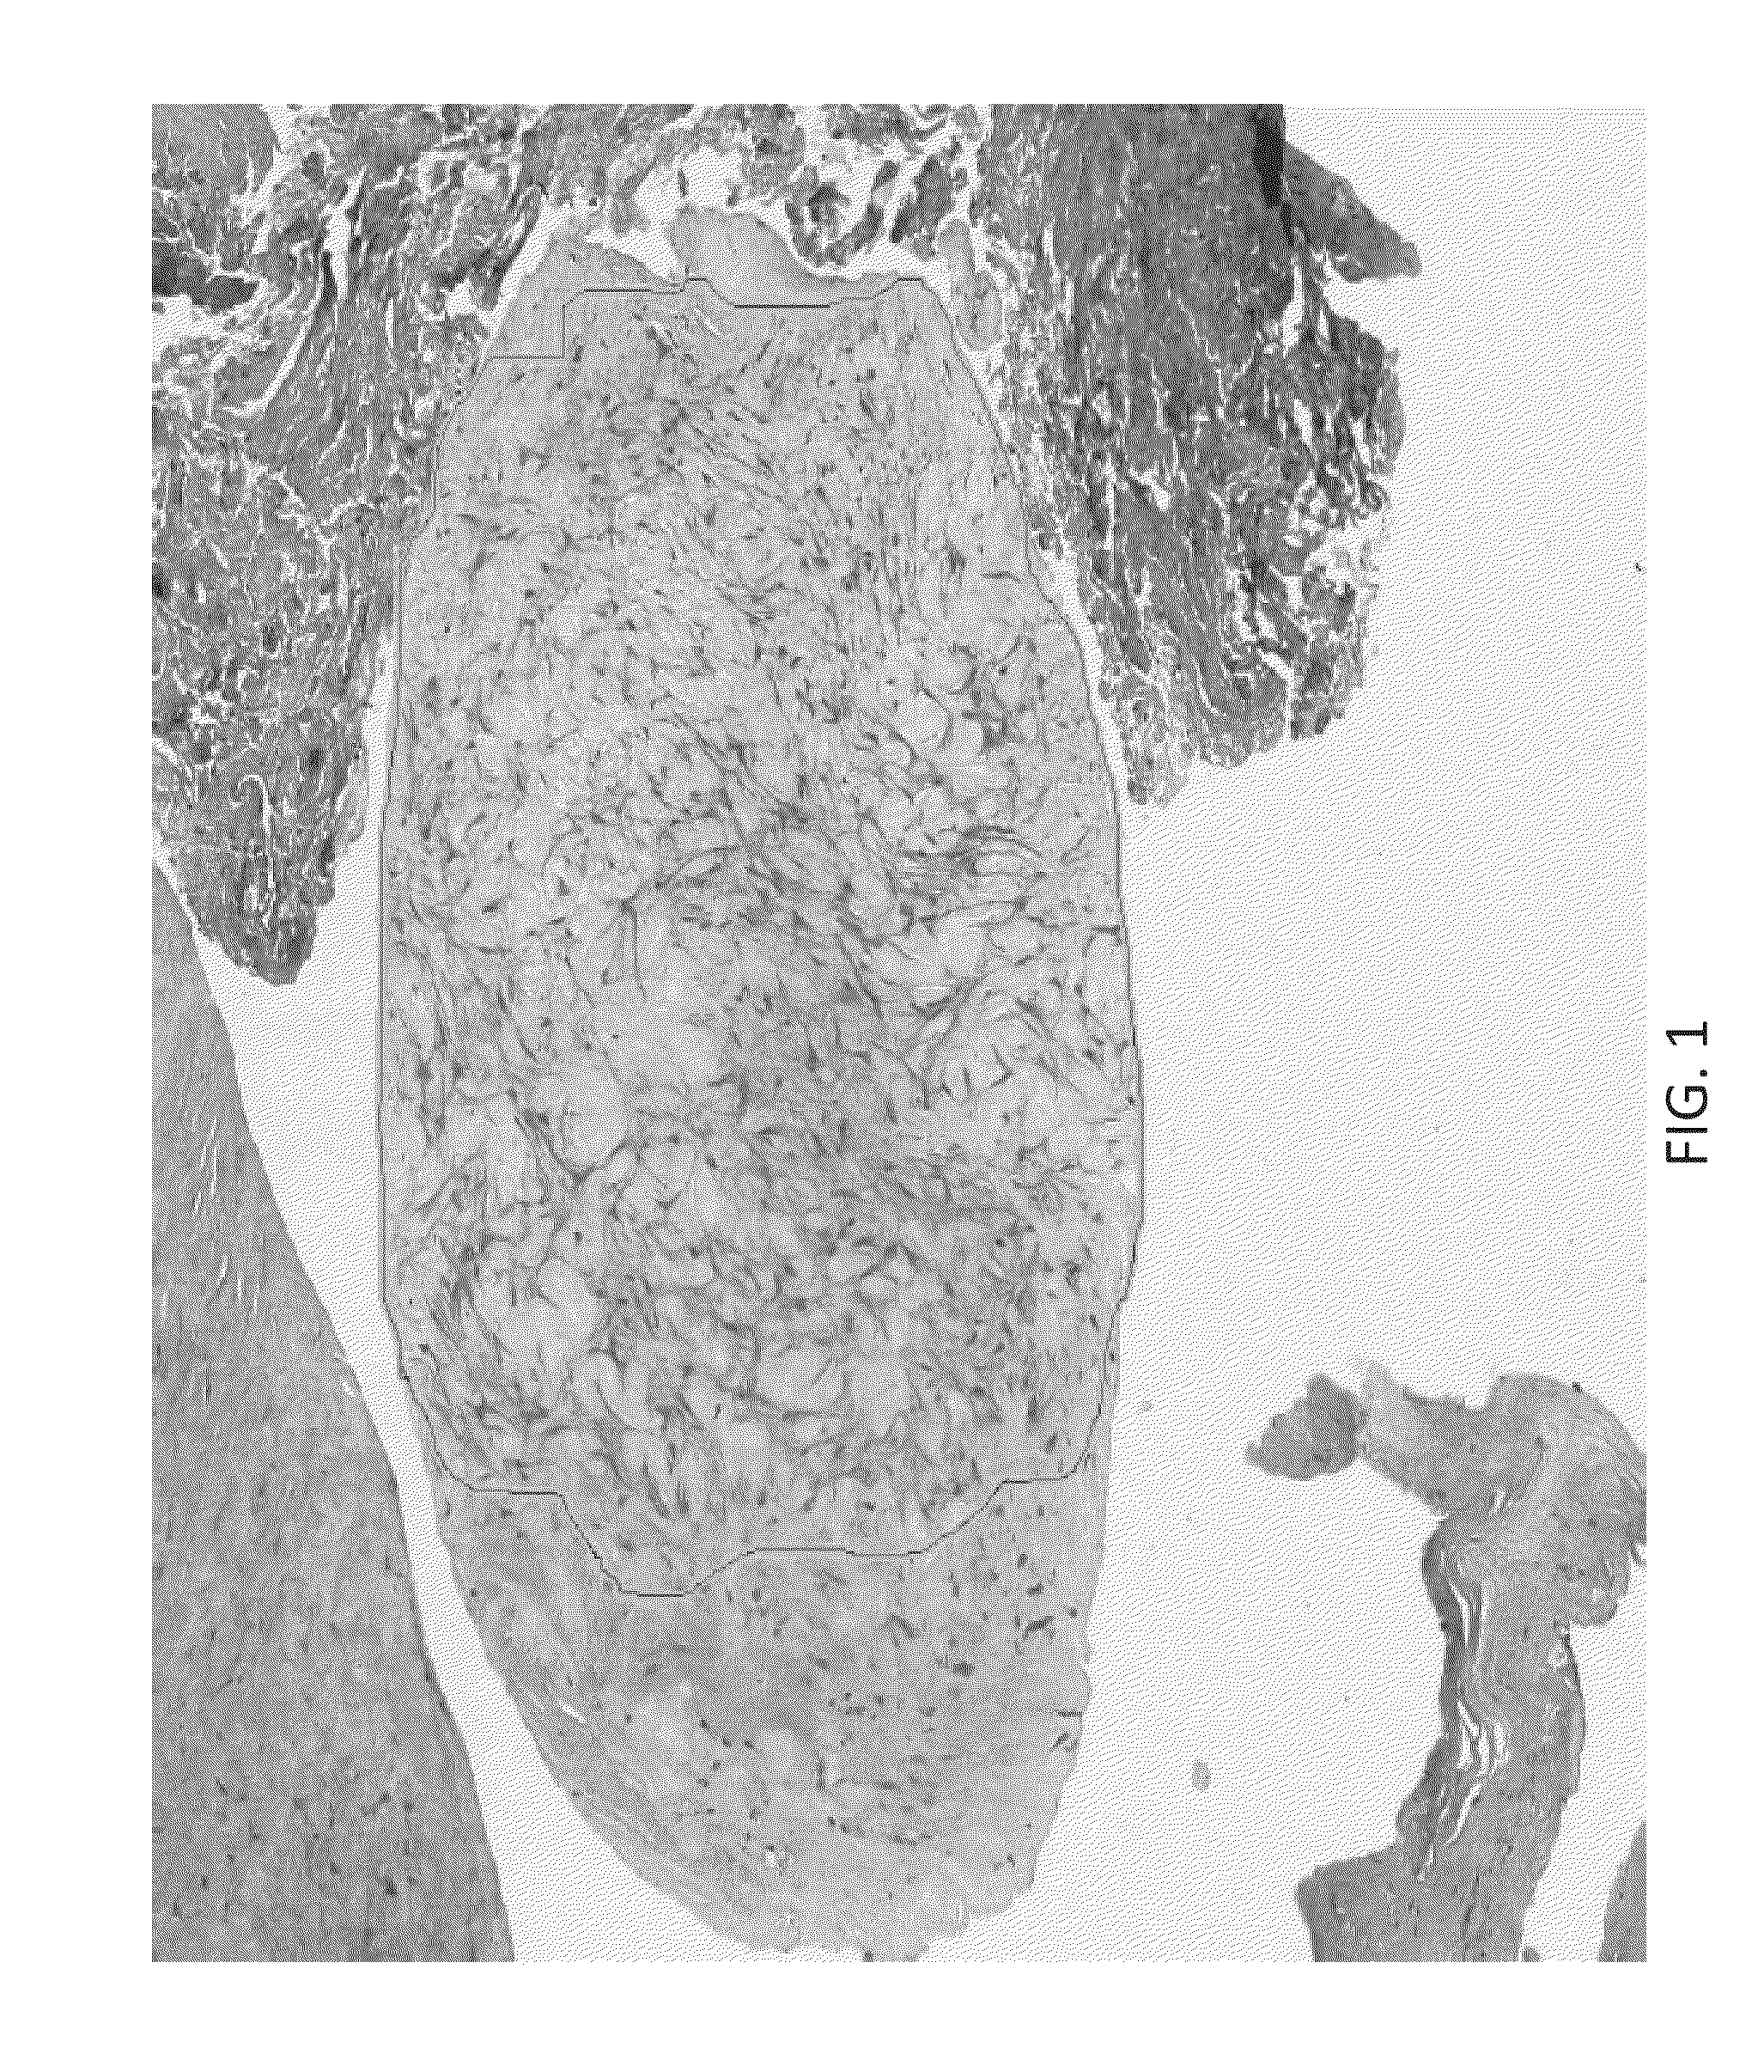 Devices and methods for predicting and preventing restenosis